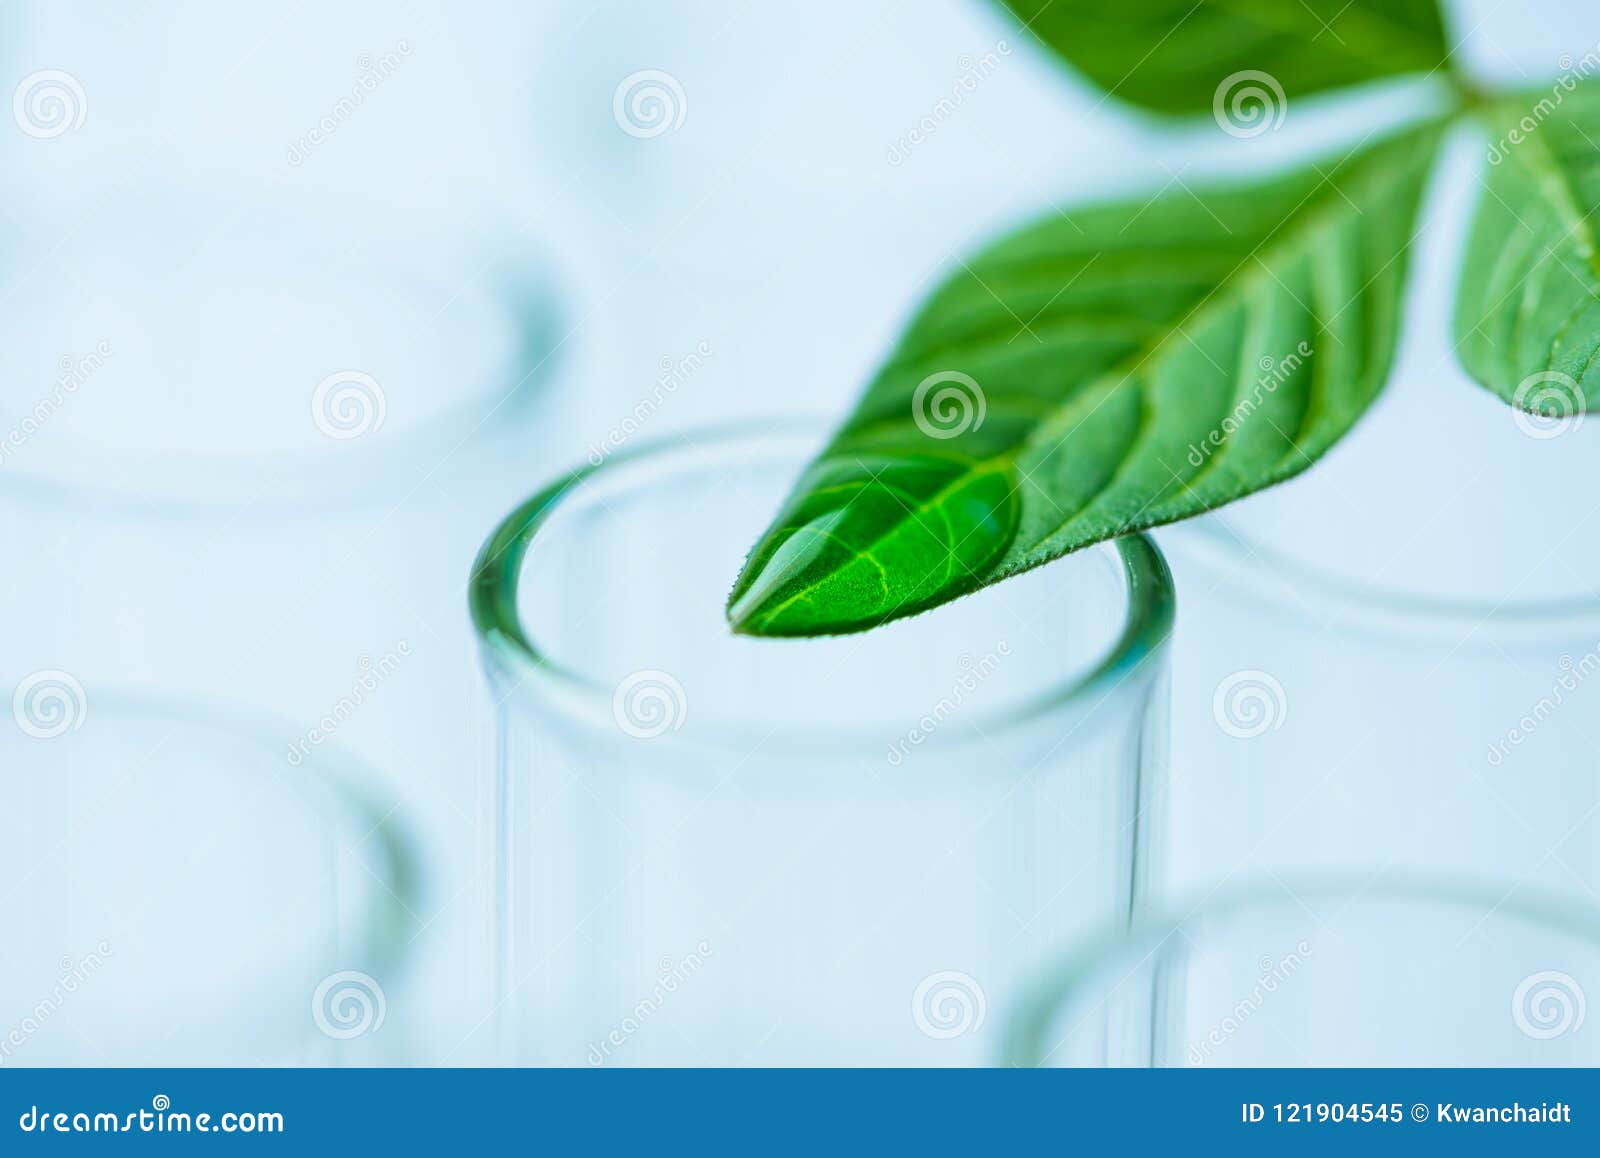 plant leaves on test tube , biotechnology research concept